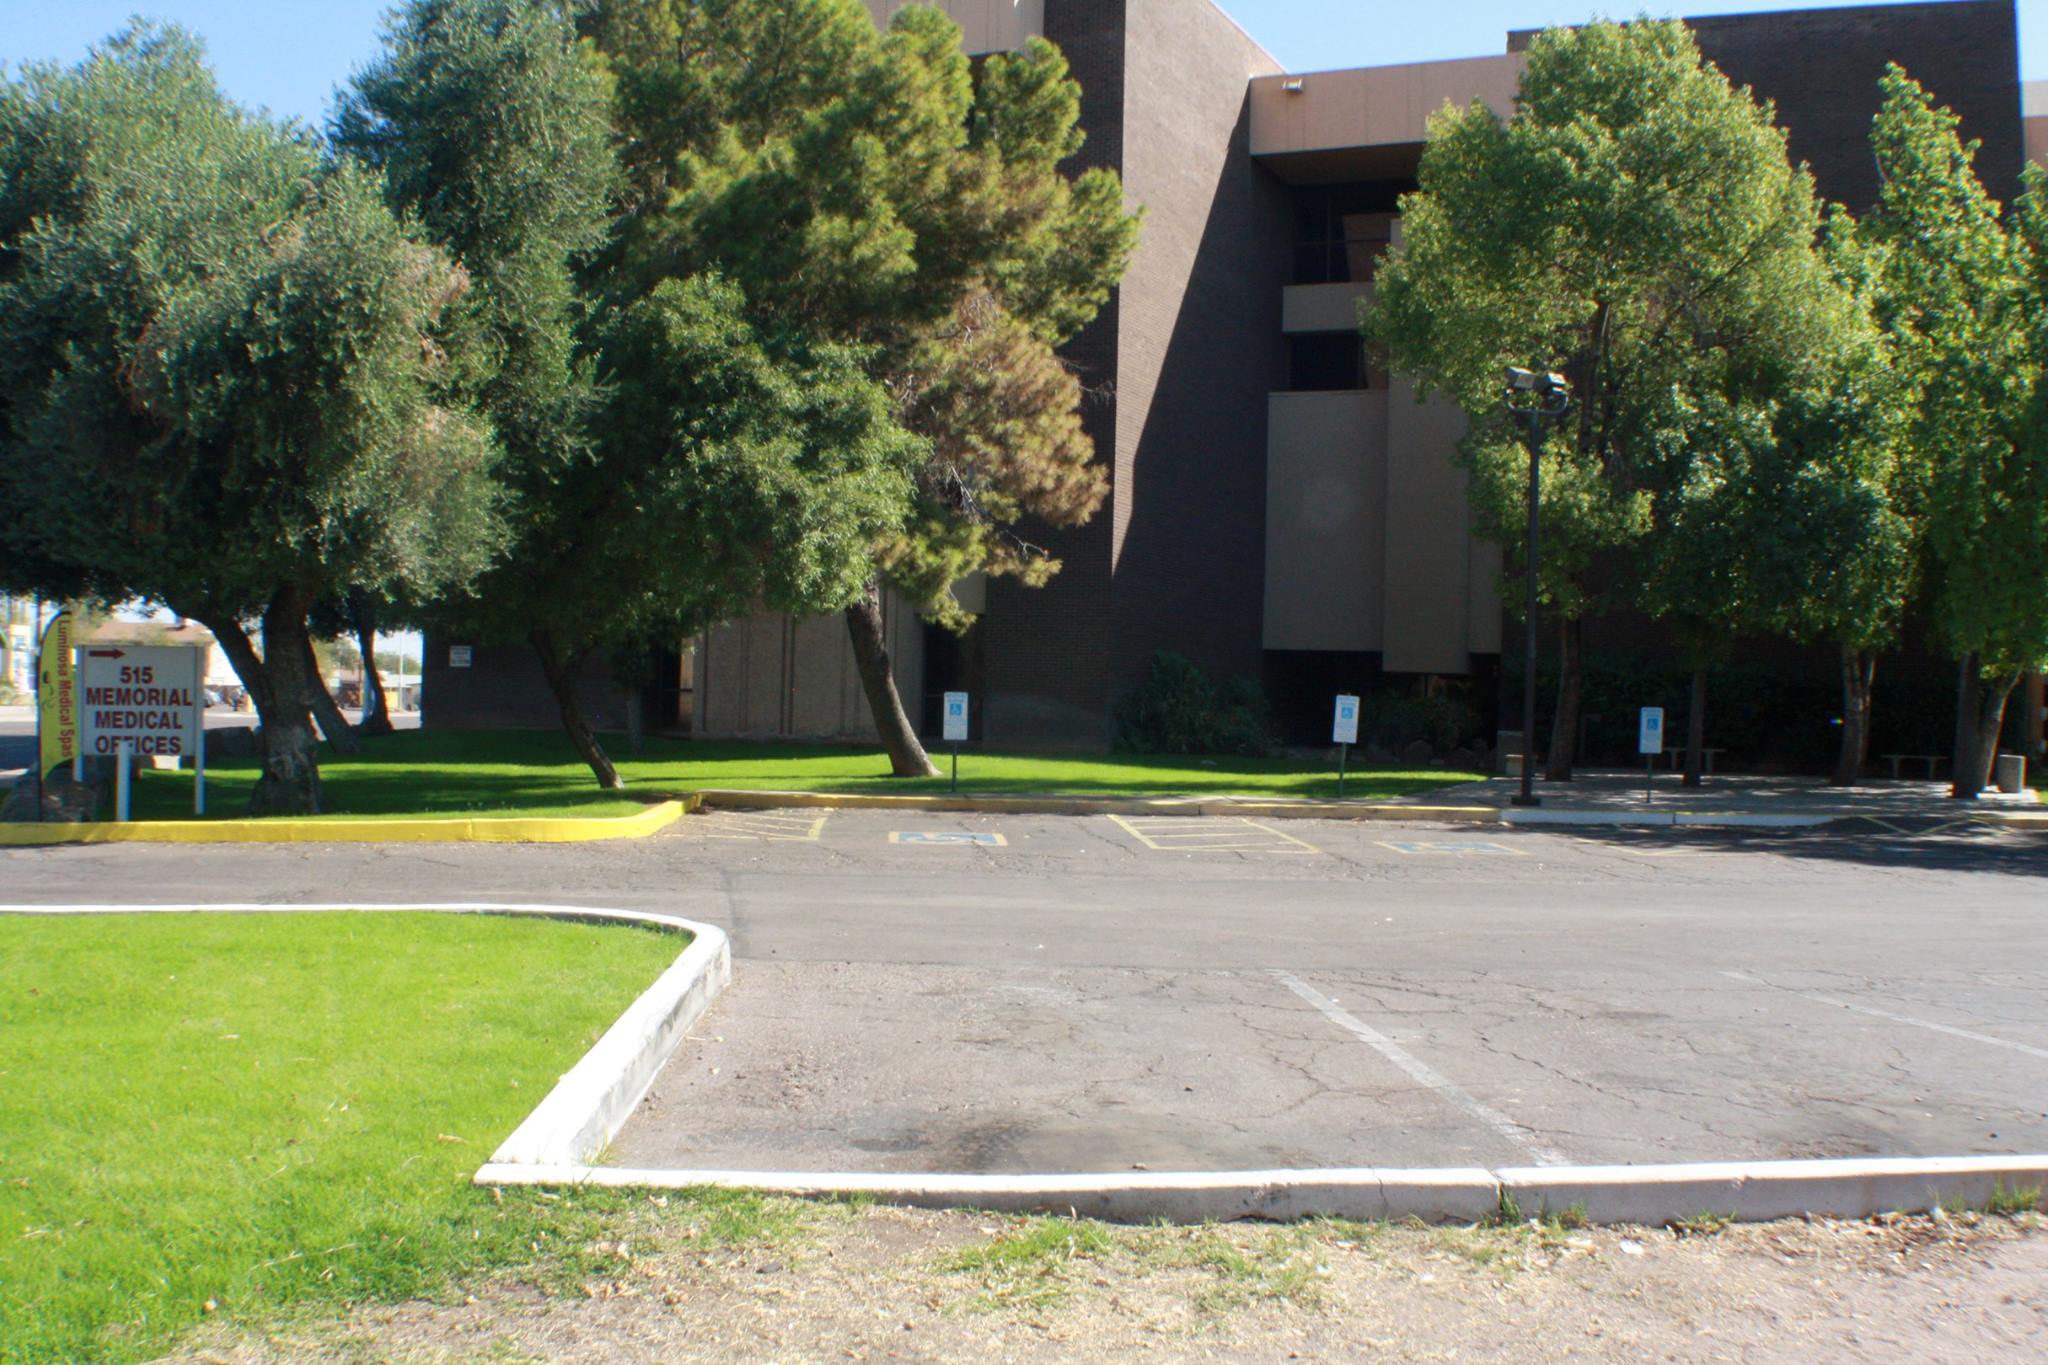 Parking Lot and Front of The Building